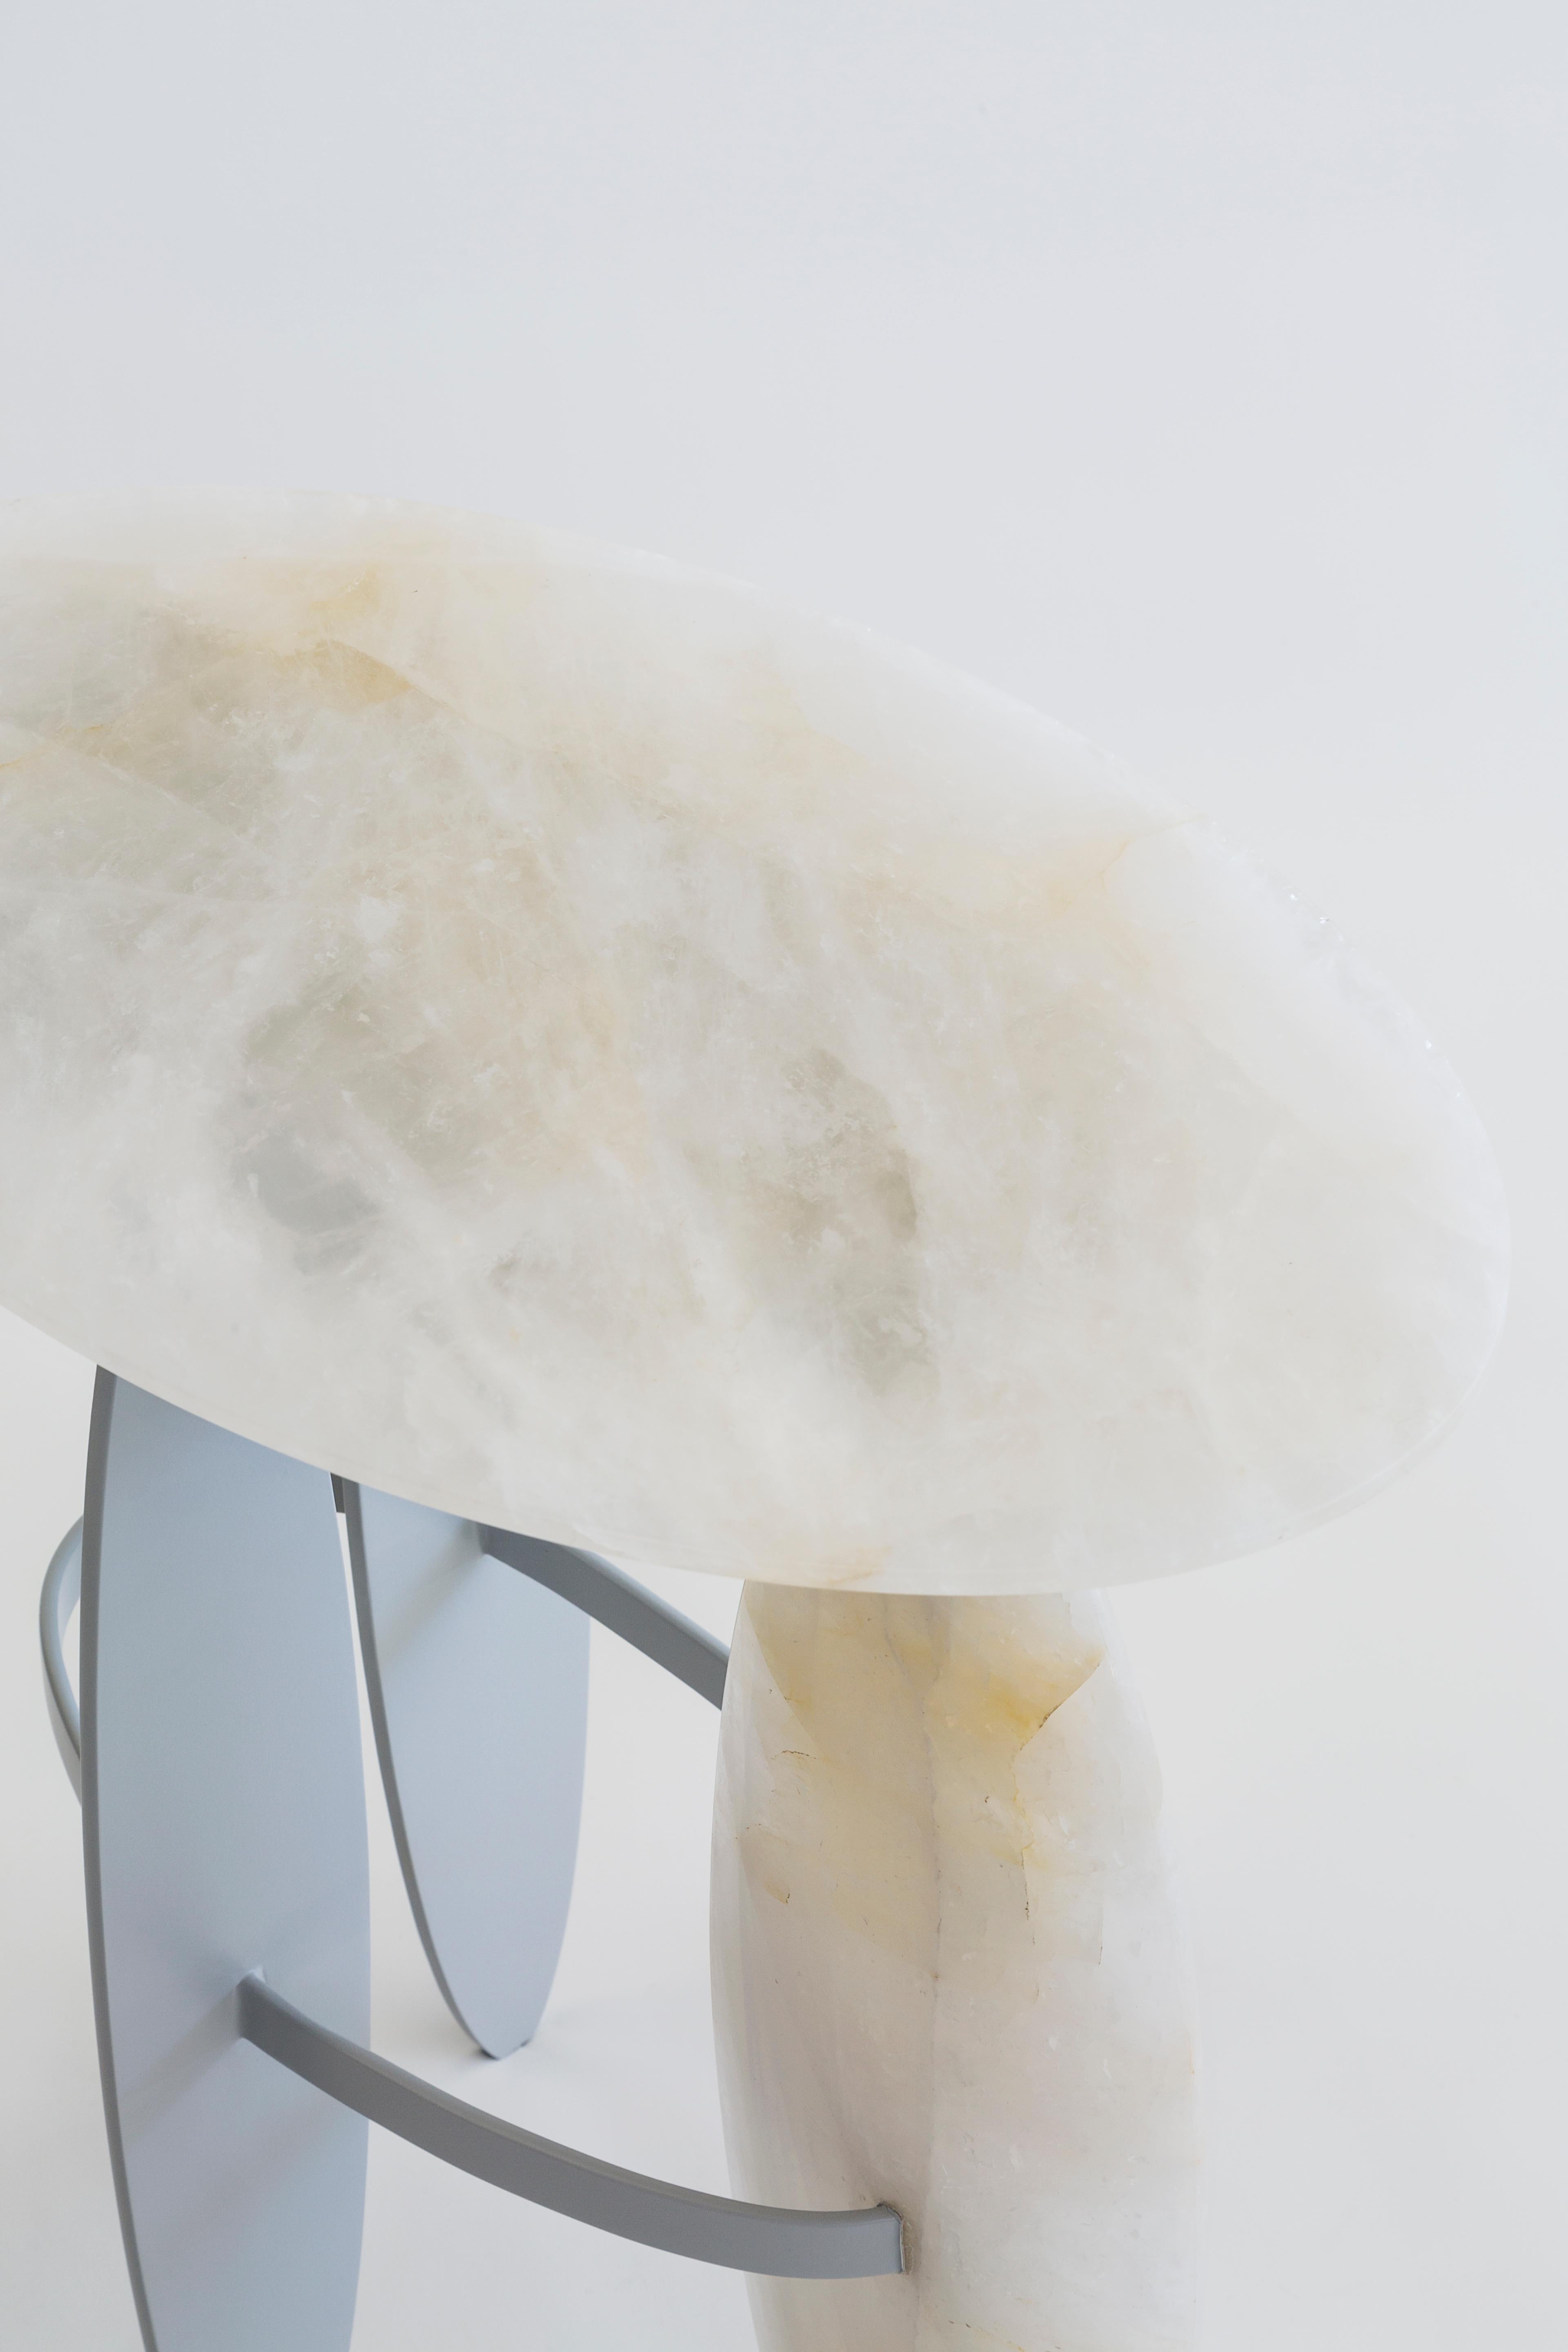 The diversity of the Brazilian forests and its wood species is widely known. But there is another type of diversity hidden underground: the stones. This special edition of side table created by Leo Di Caprio is made of pure quartz stone.
This stone